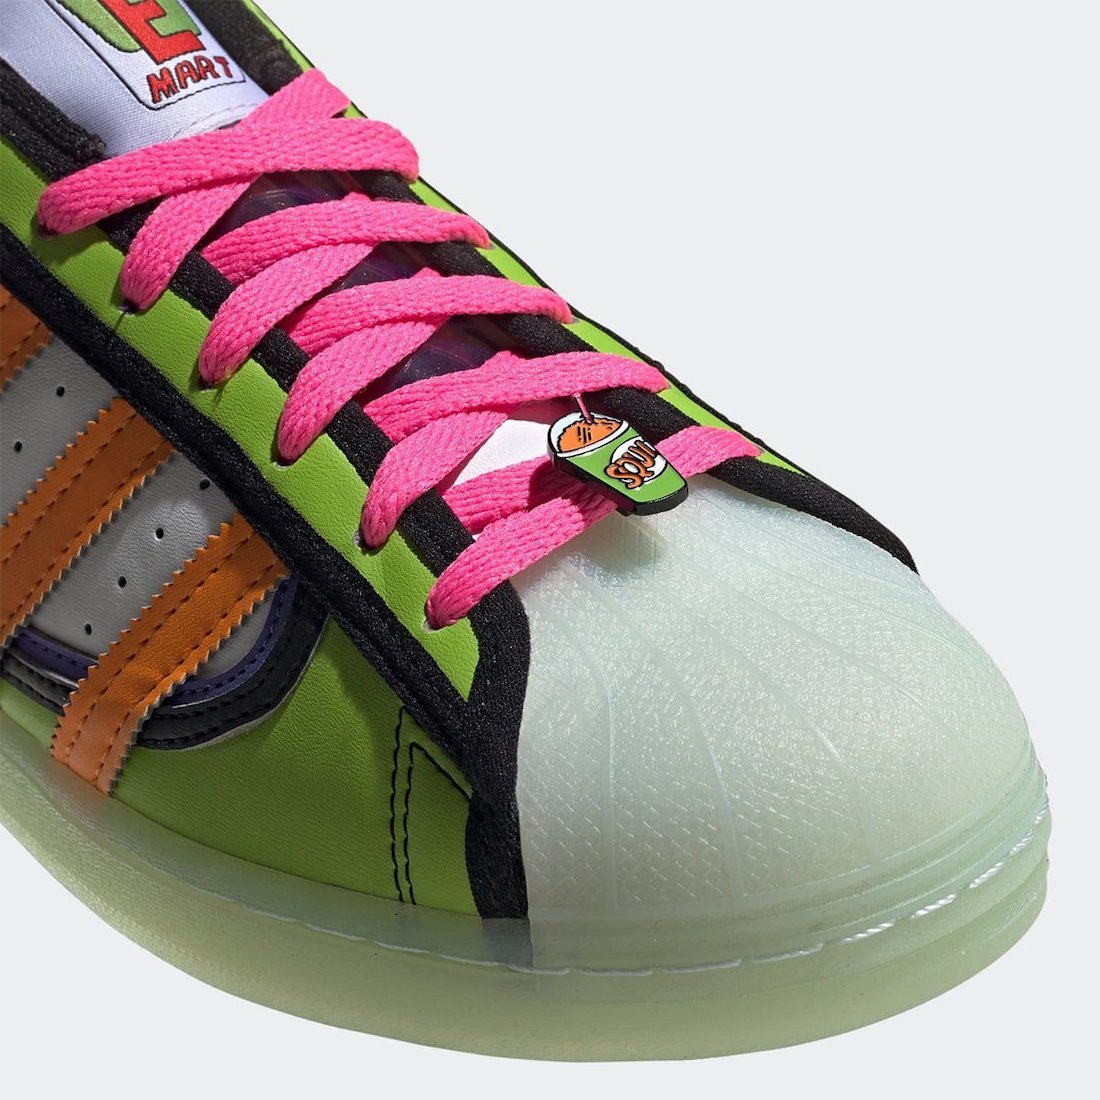 The-Simpsons-adidas-Superstar-Squishee-H05789-Release-Date-6